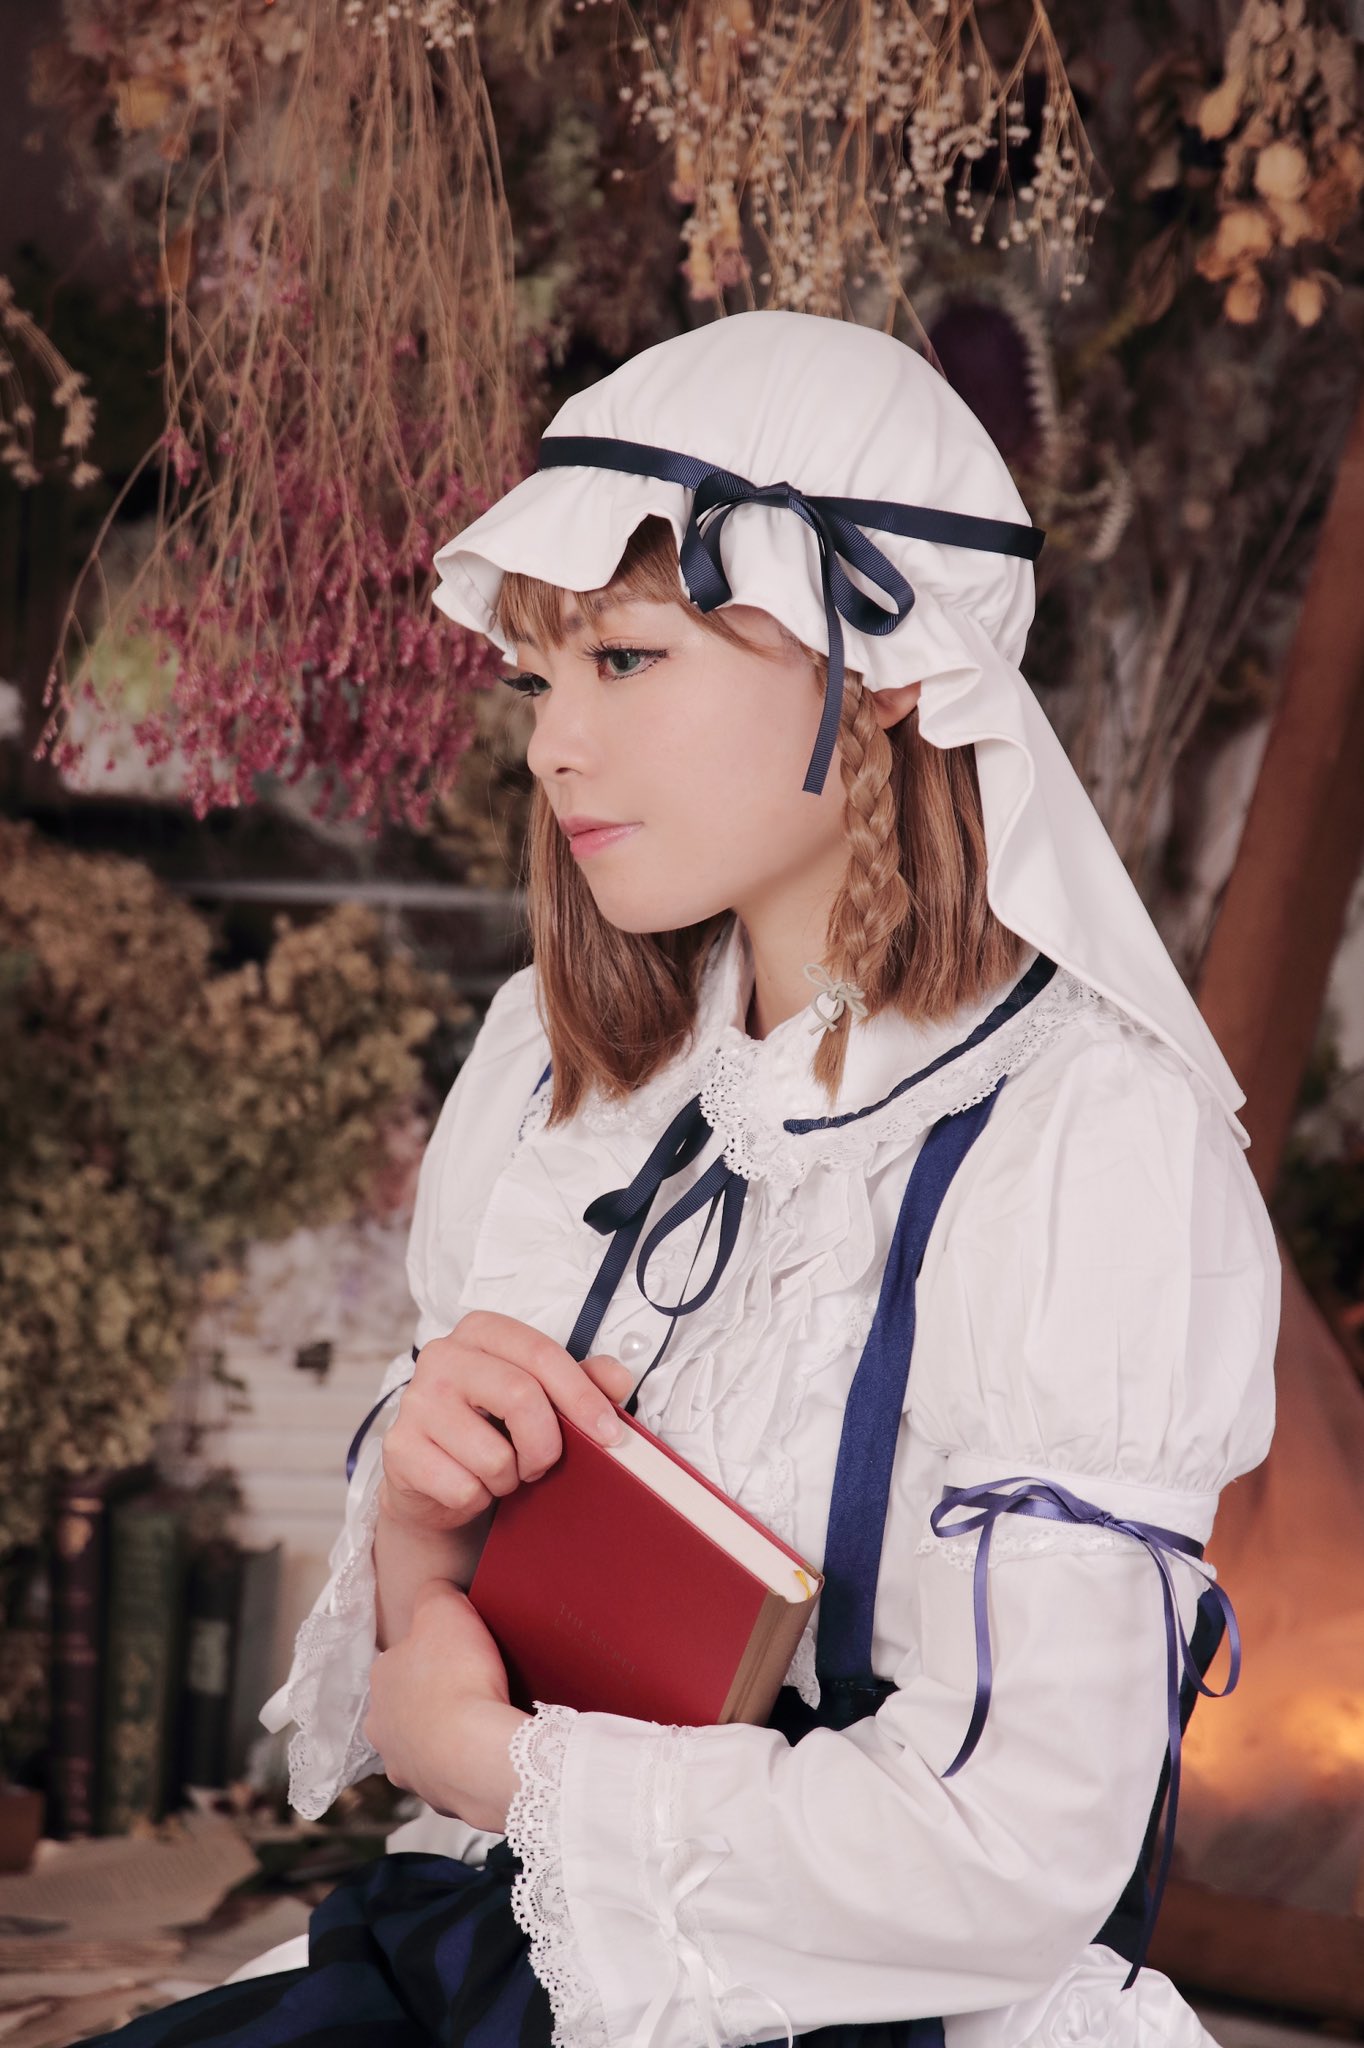 People 1364x2048 Charlotte Corday (Fate/Grand Order) Fate series Fate/Grand Order Asian asian cosplayer cosplay Japanese clothes Japanese women women short hair brunette